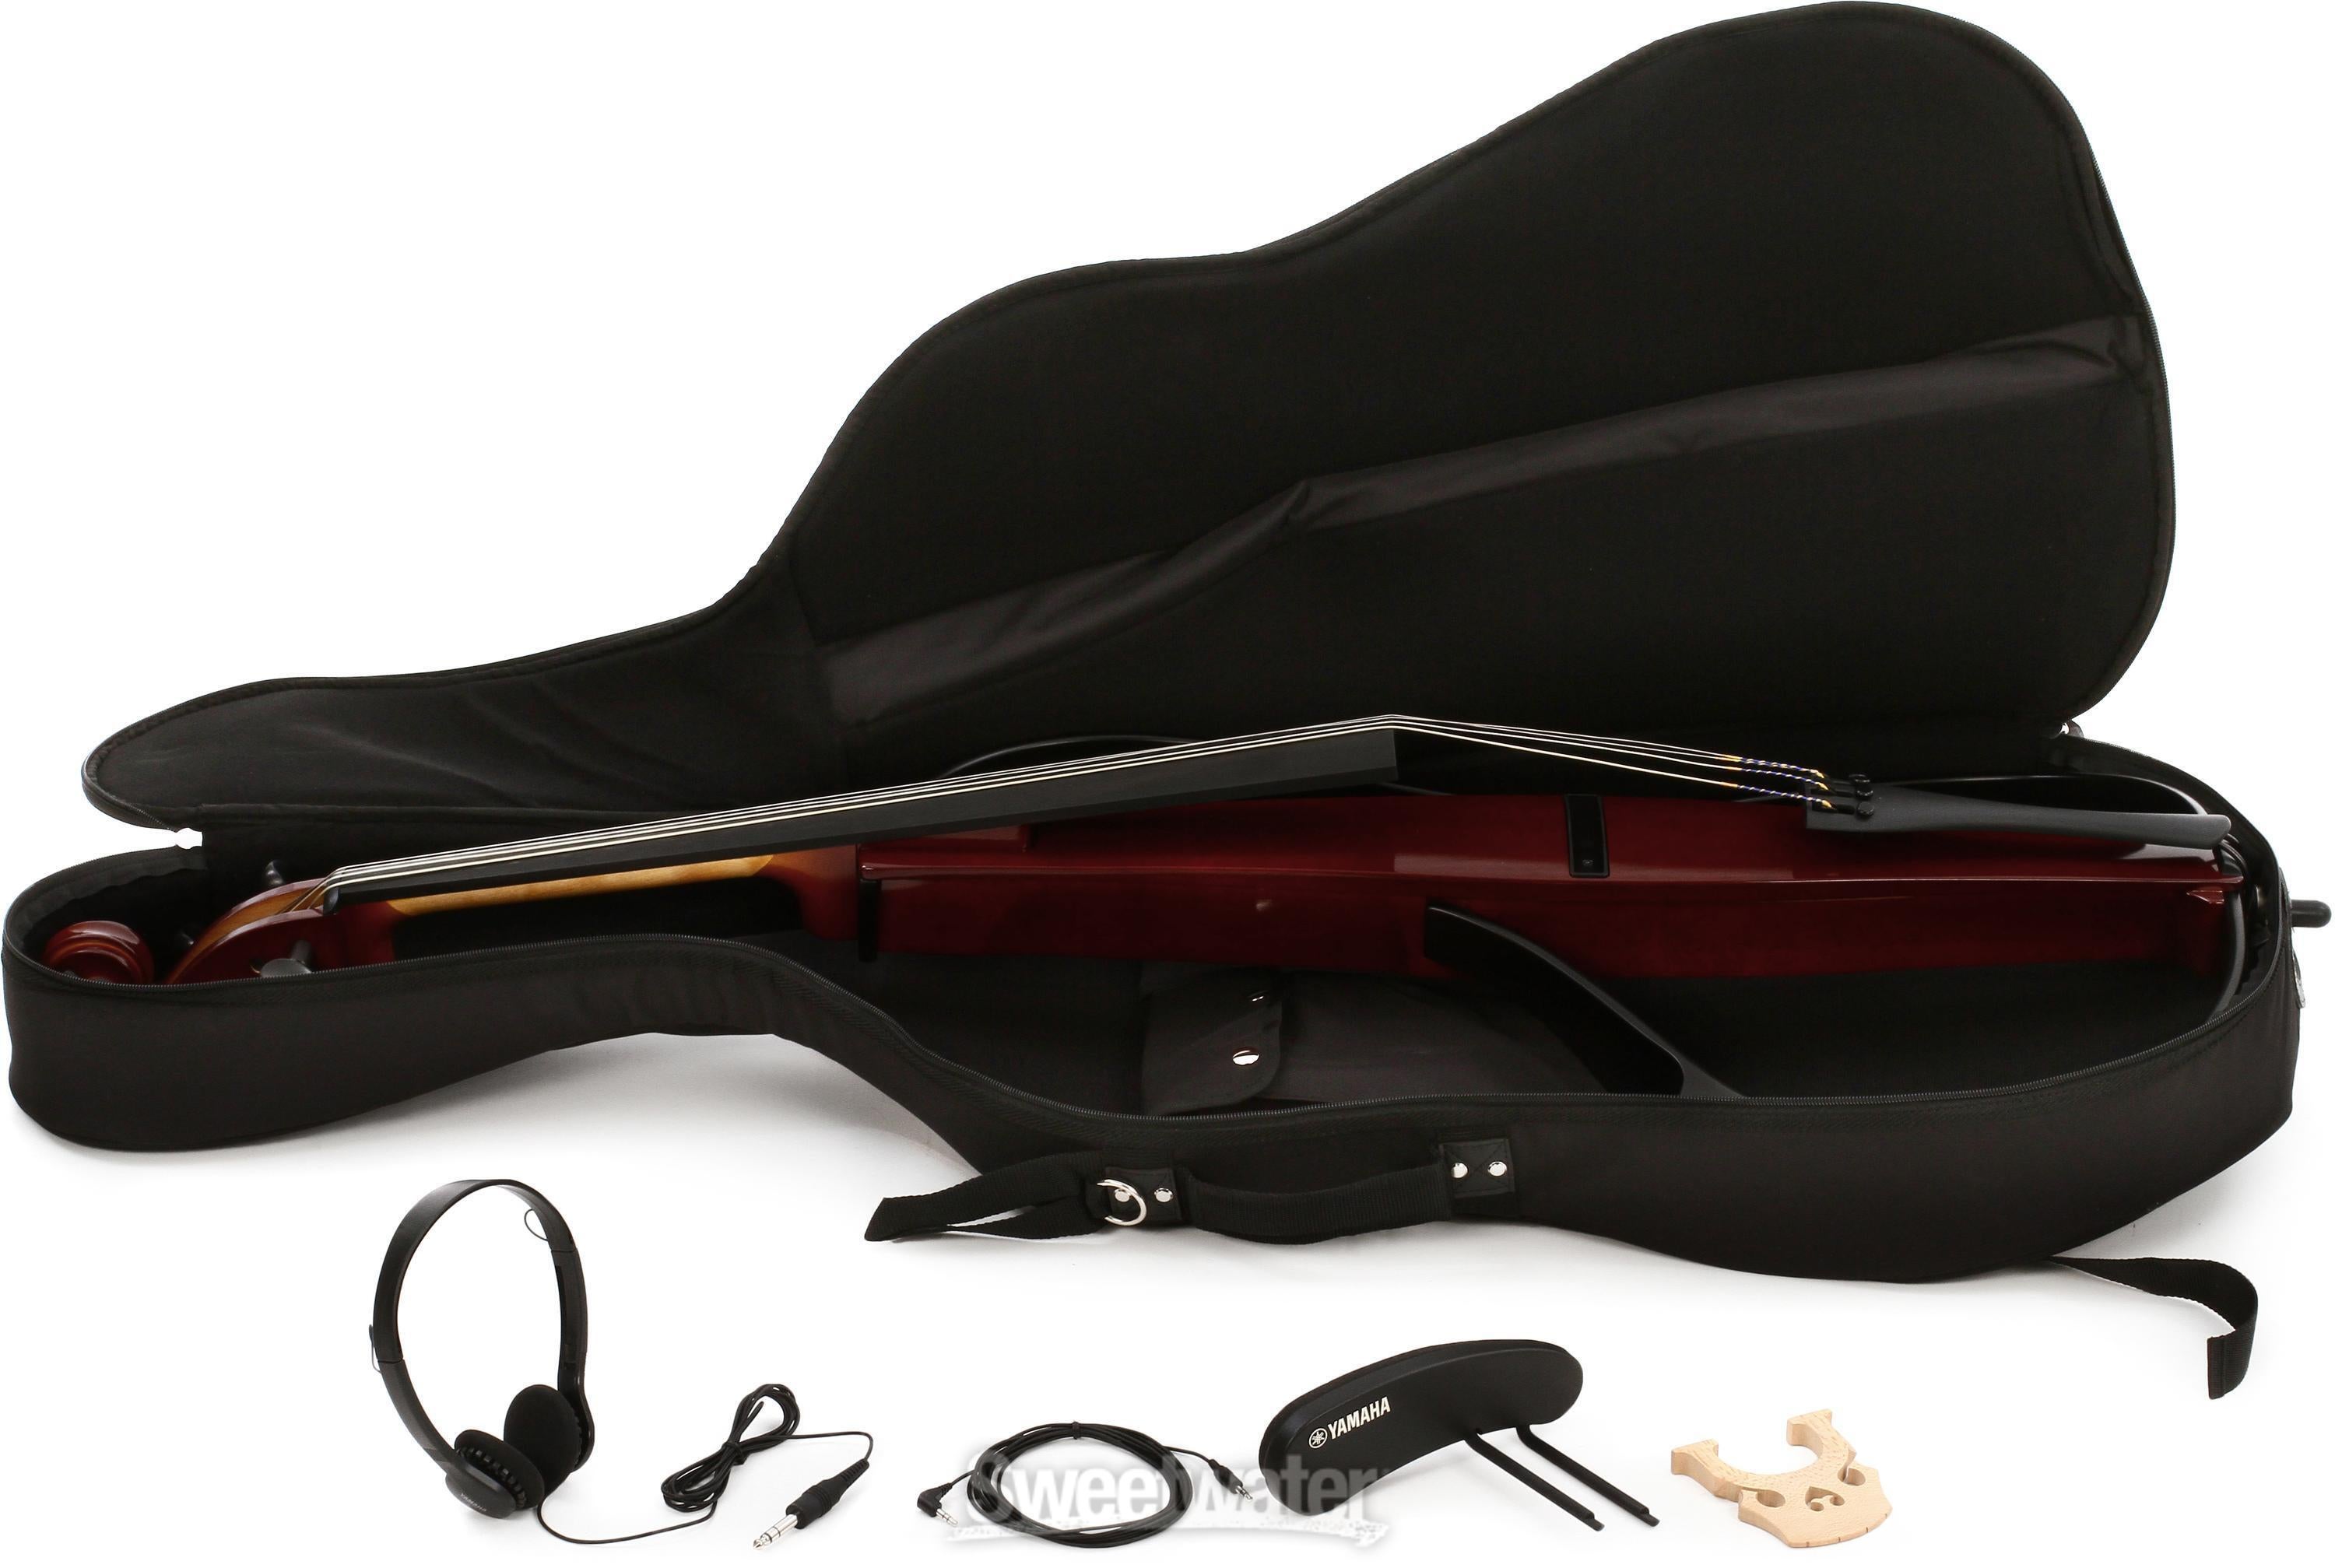 Yamaha Silent Cello SVC-110SK Electric Cello - Brown | Sweetwater